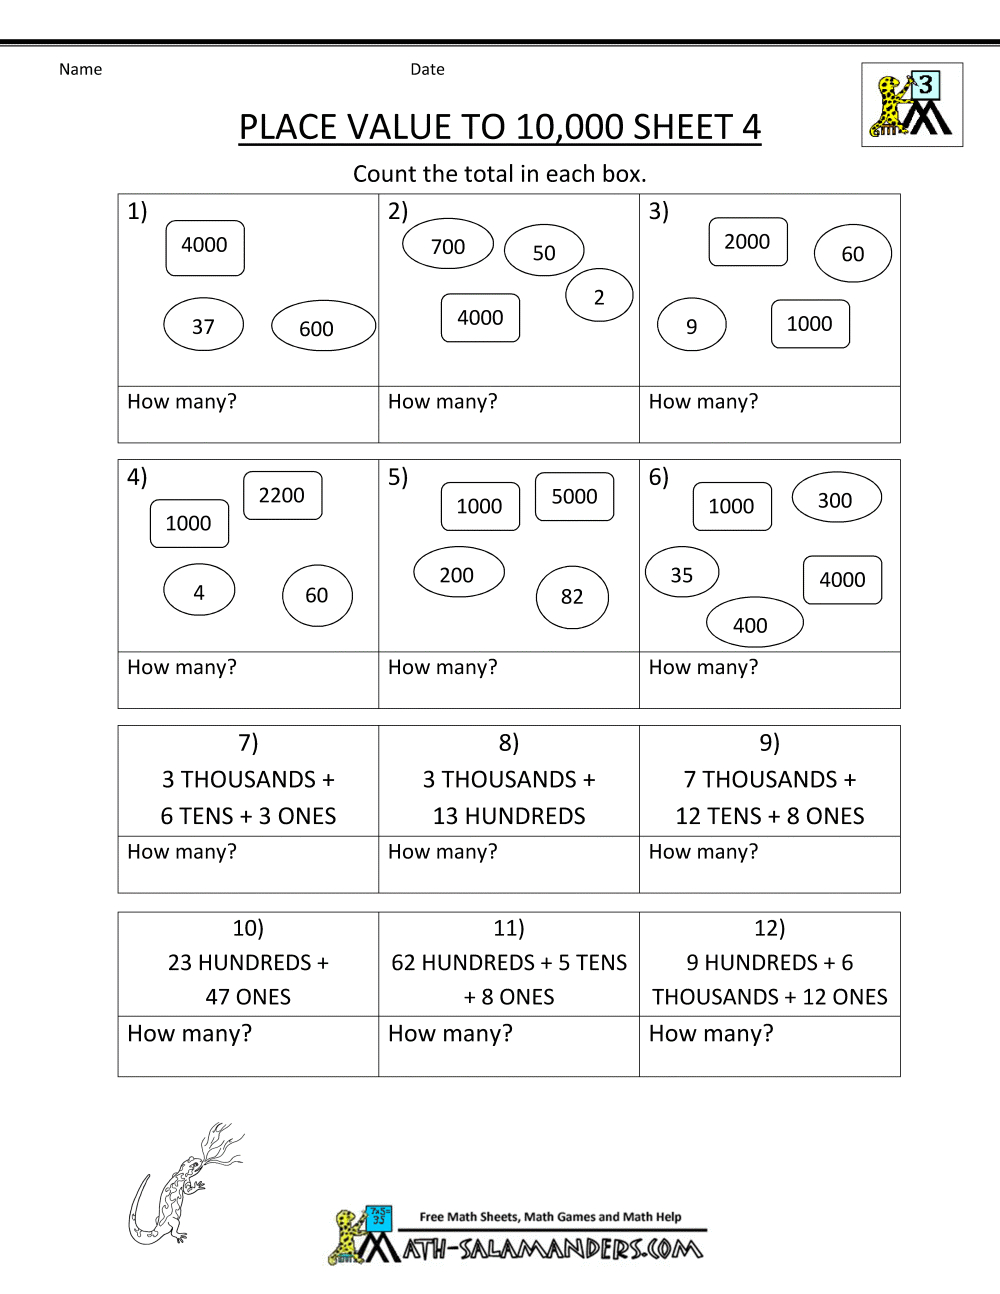 Math worksheets 3rd grade place value to 10000 4 gif 1 000 1 294 Pixels